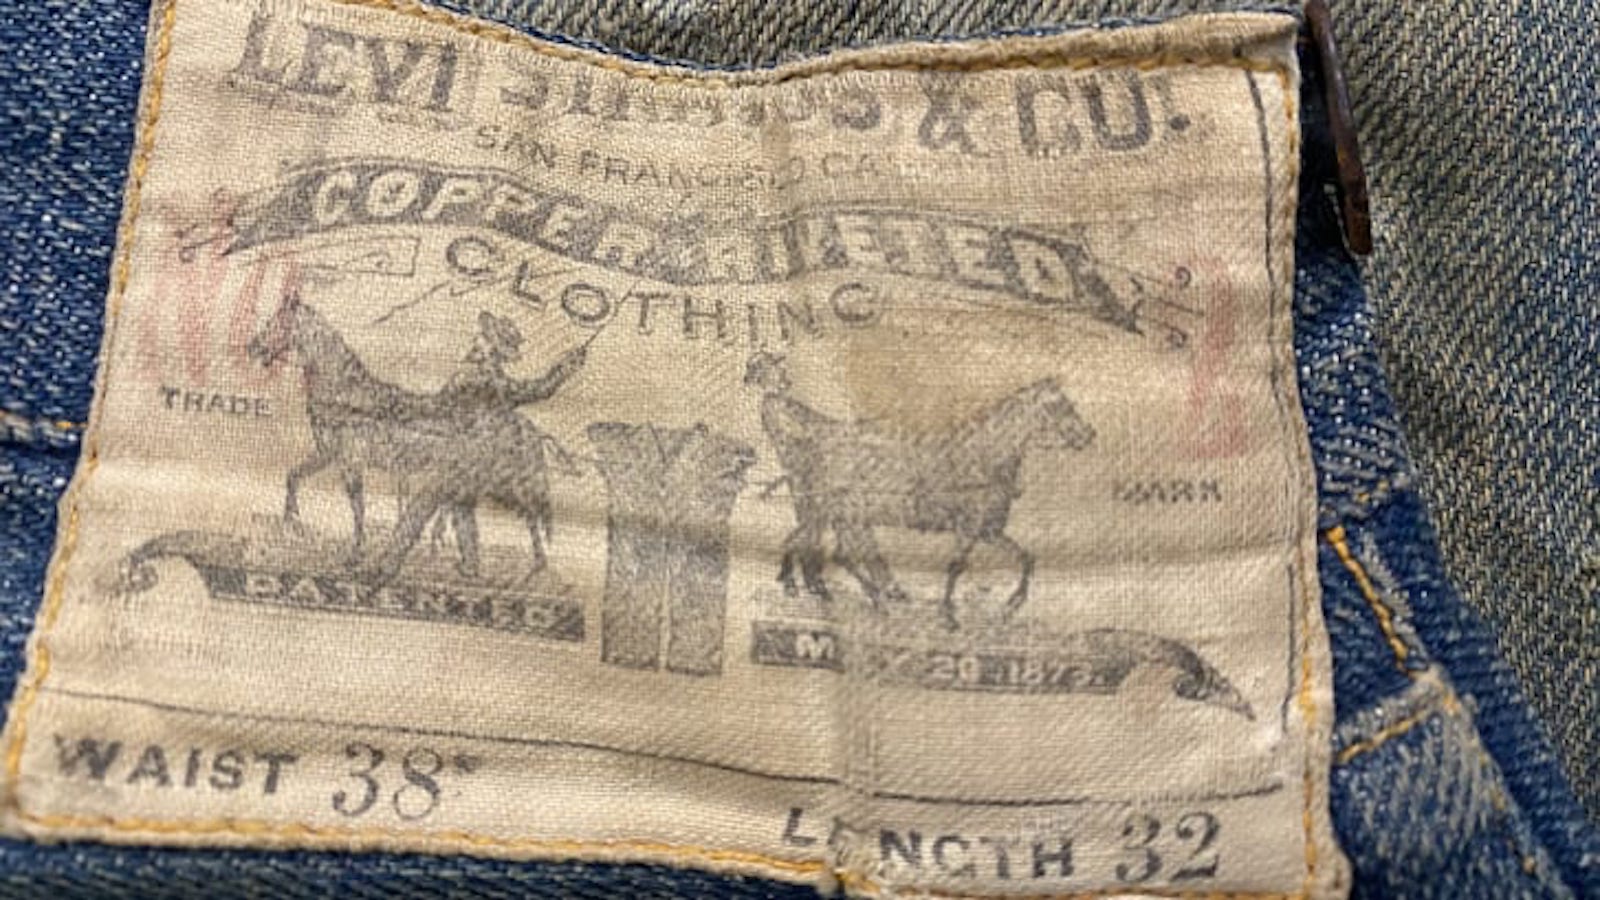 Nineteenth-century Levi's jeans sold for more than a million pesos